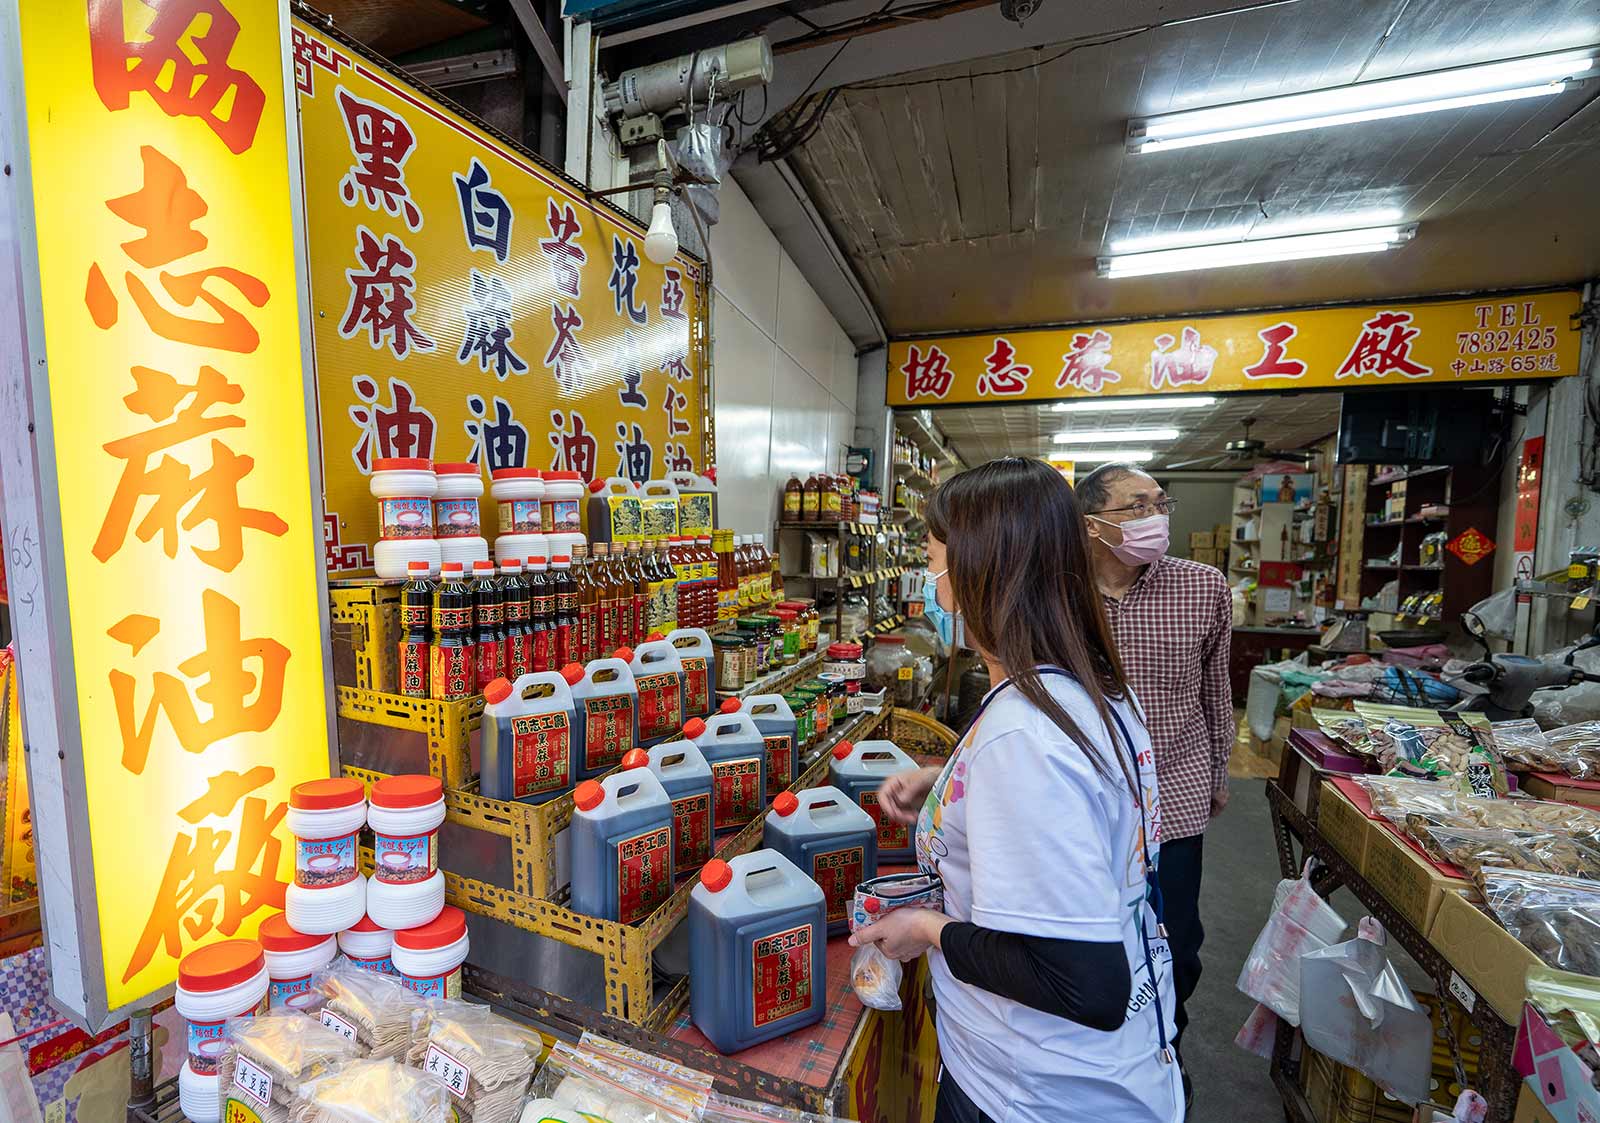 The interior of a shop specializing in sesame oil.